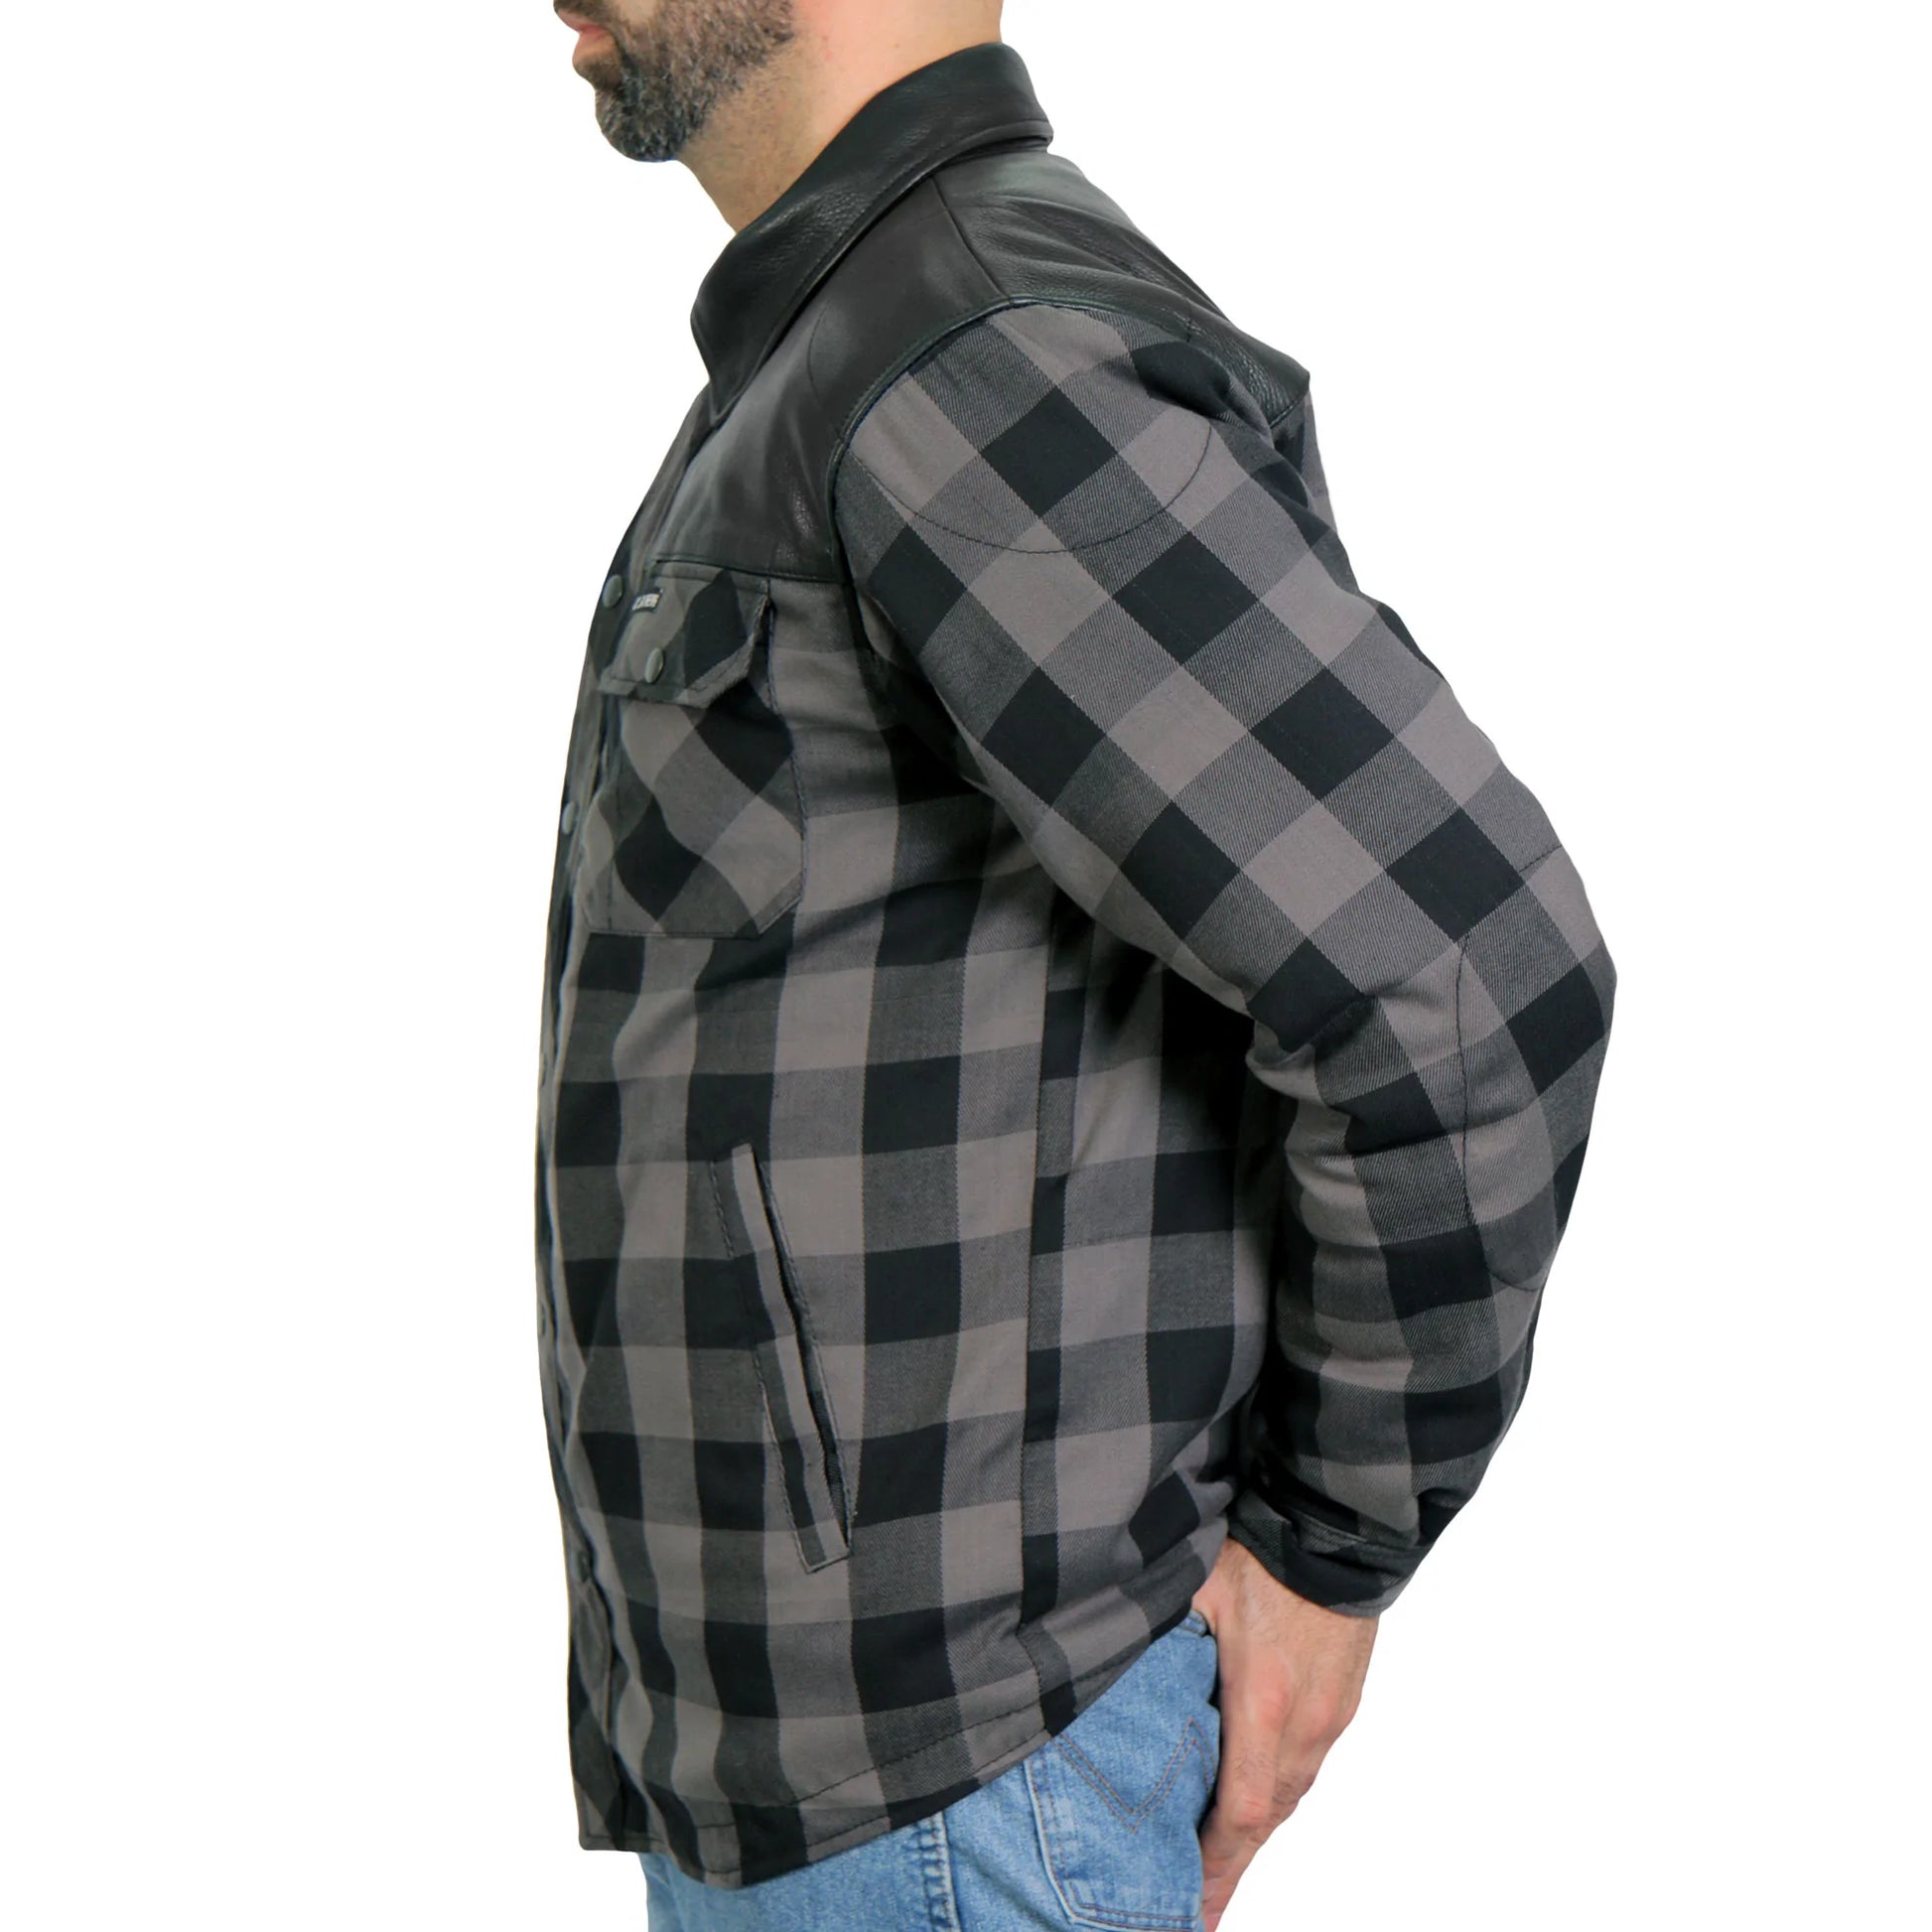 Reinforced Leather Grey and Black Flannel - Extreme Biker Leather